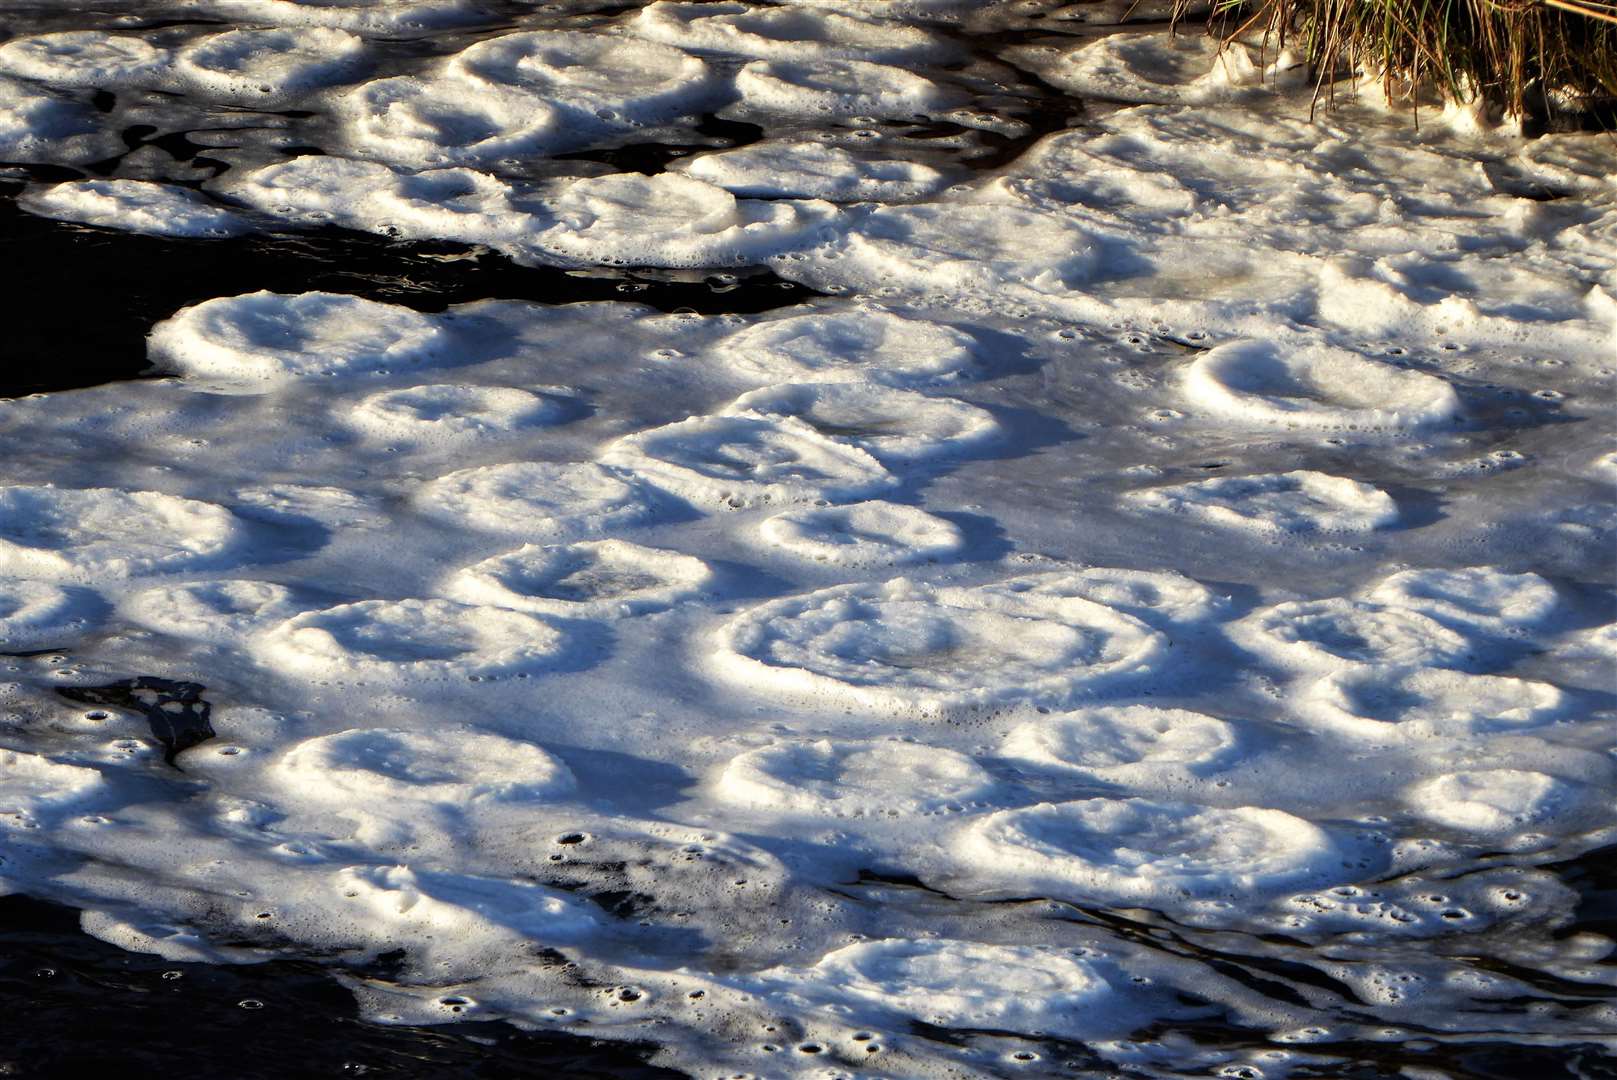 The icy discs form when conditions are just below freezing.